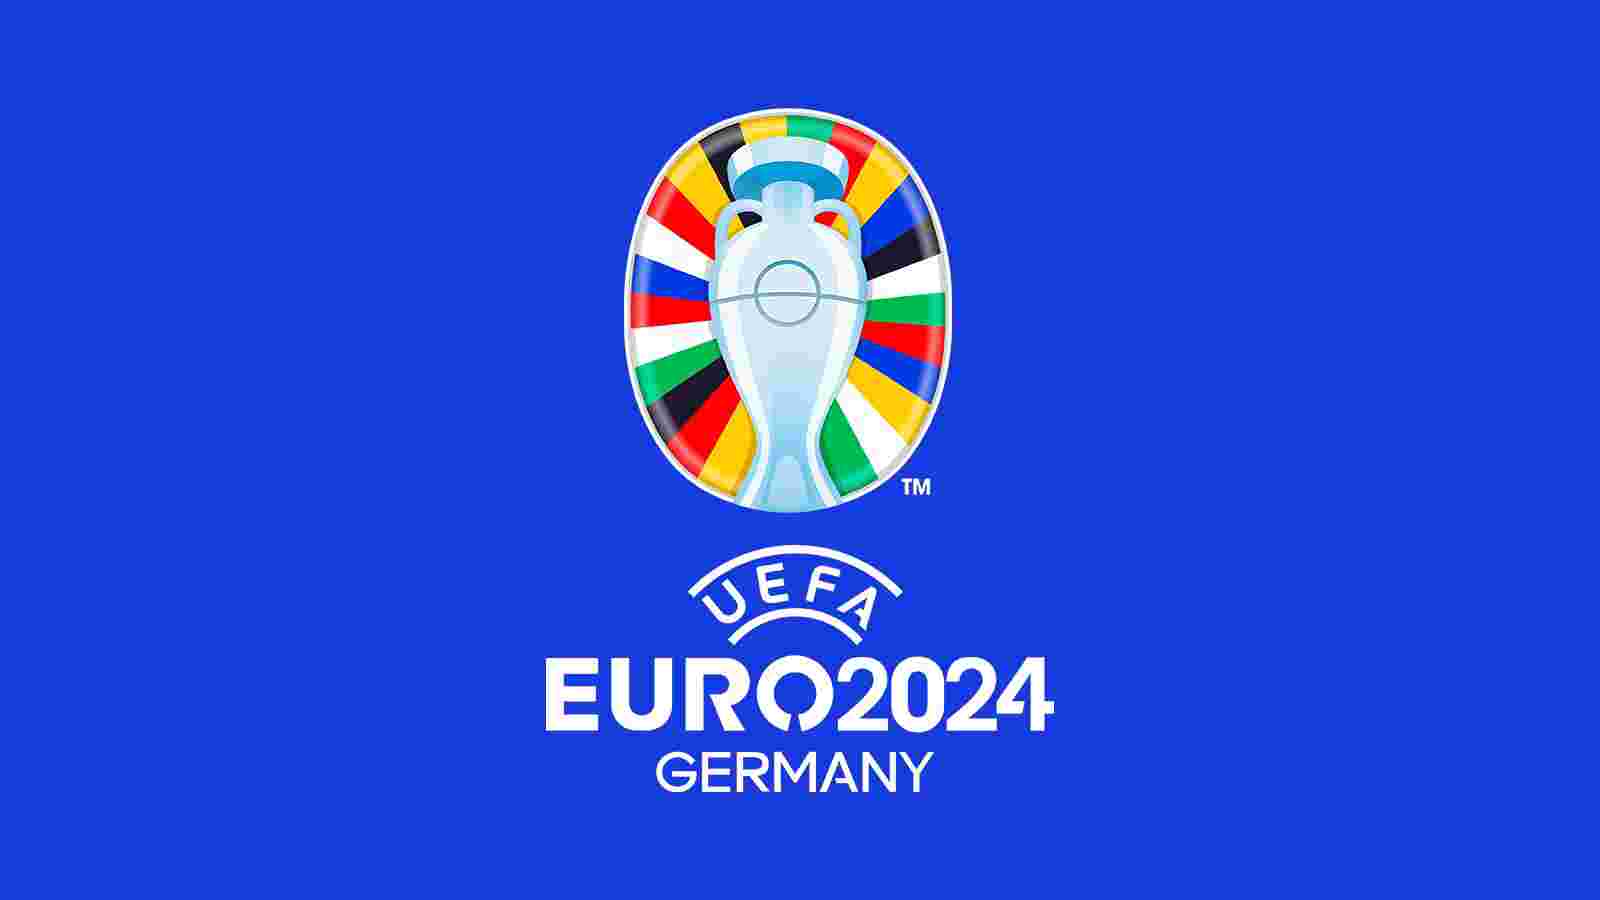 National Bank of Georgia to Issue Exclusive Euro 2024 Collector's Coin for Historic Football Triumph